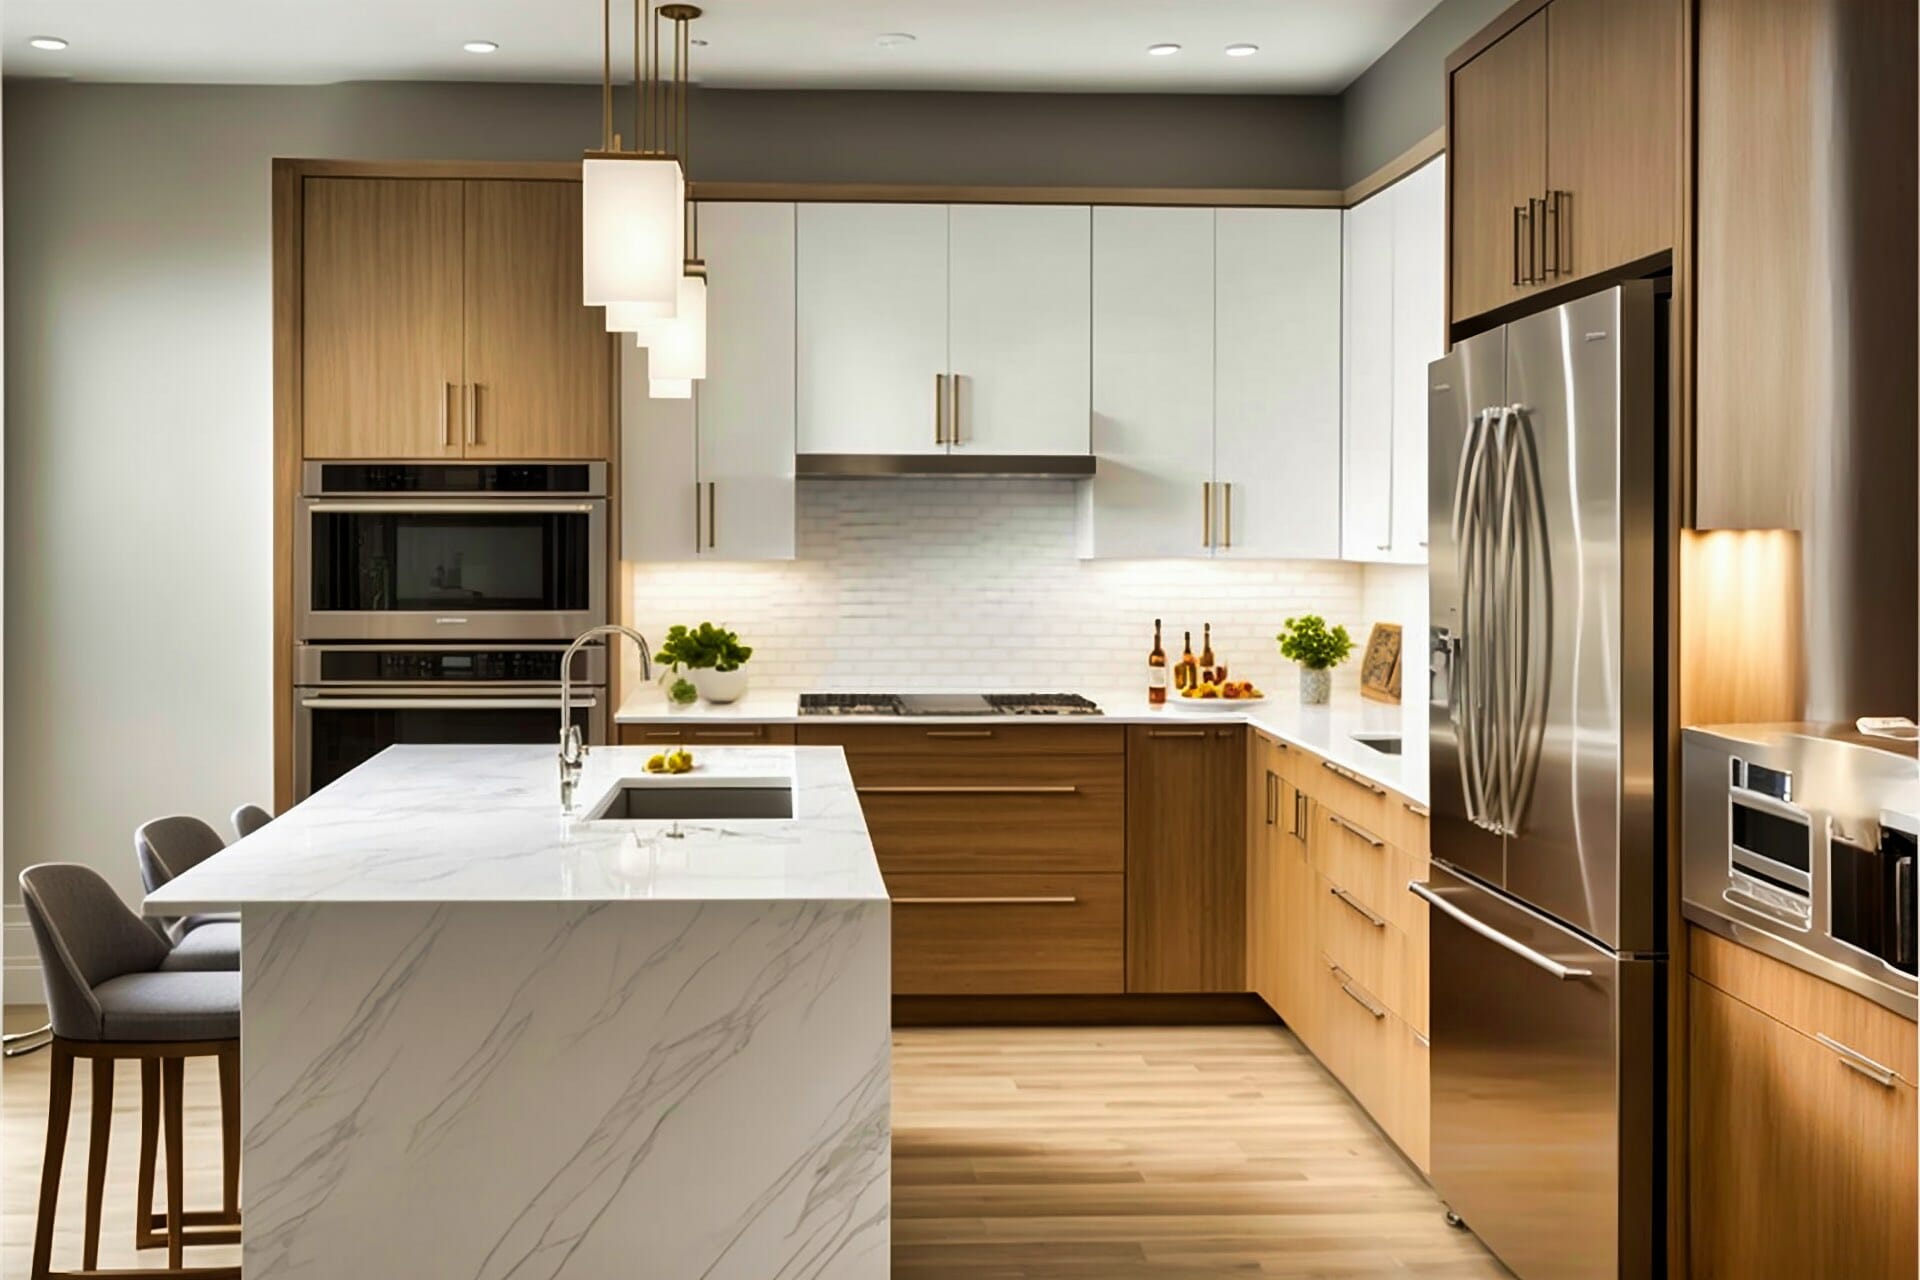 A Sleek, Modern Kitchen Featuring A Mix Of Oak Cabinetry And Stainless Steel Appliances, A White Marble Countertop, And A Glass Pendant Light.